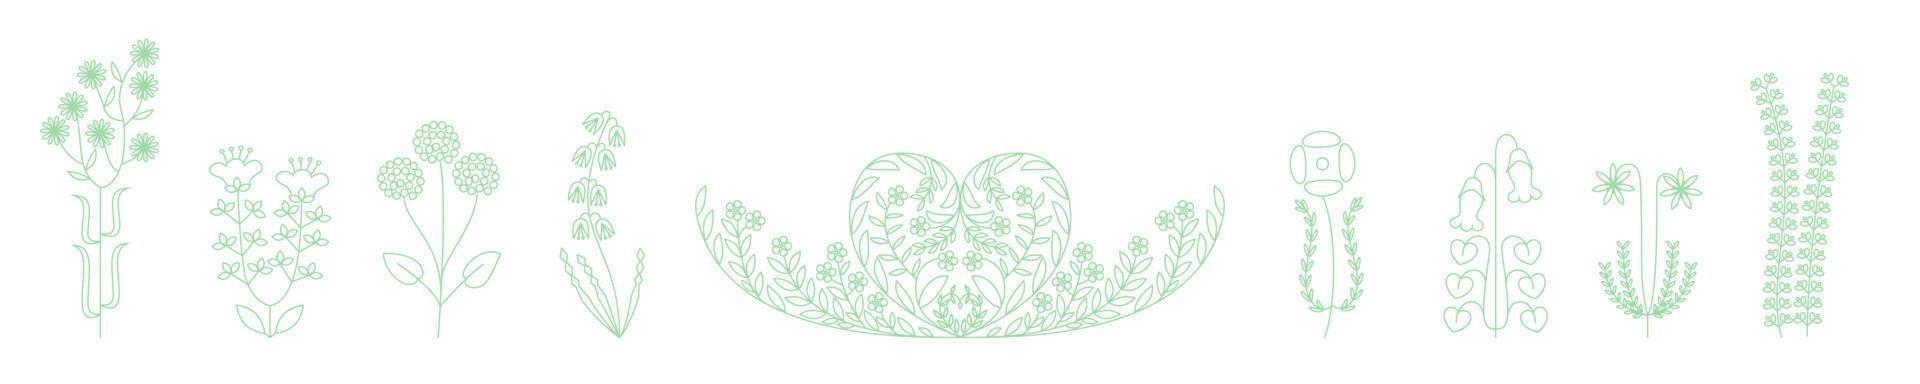 Blossom flower Set on white isolated background via Botanical illustration and Decorative floral object in line art vector